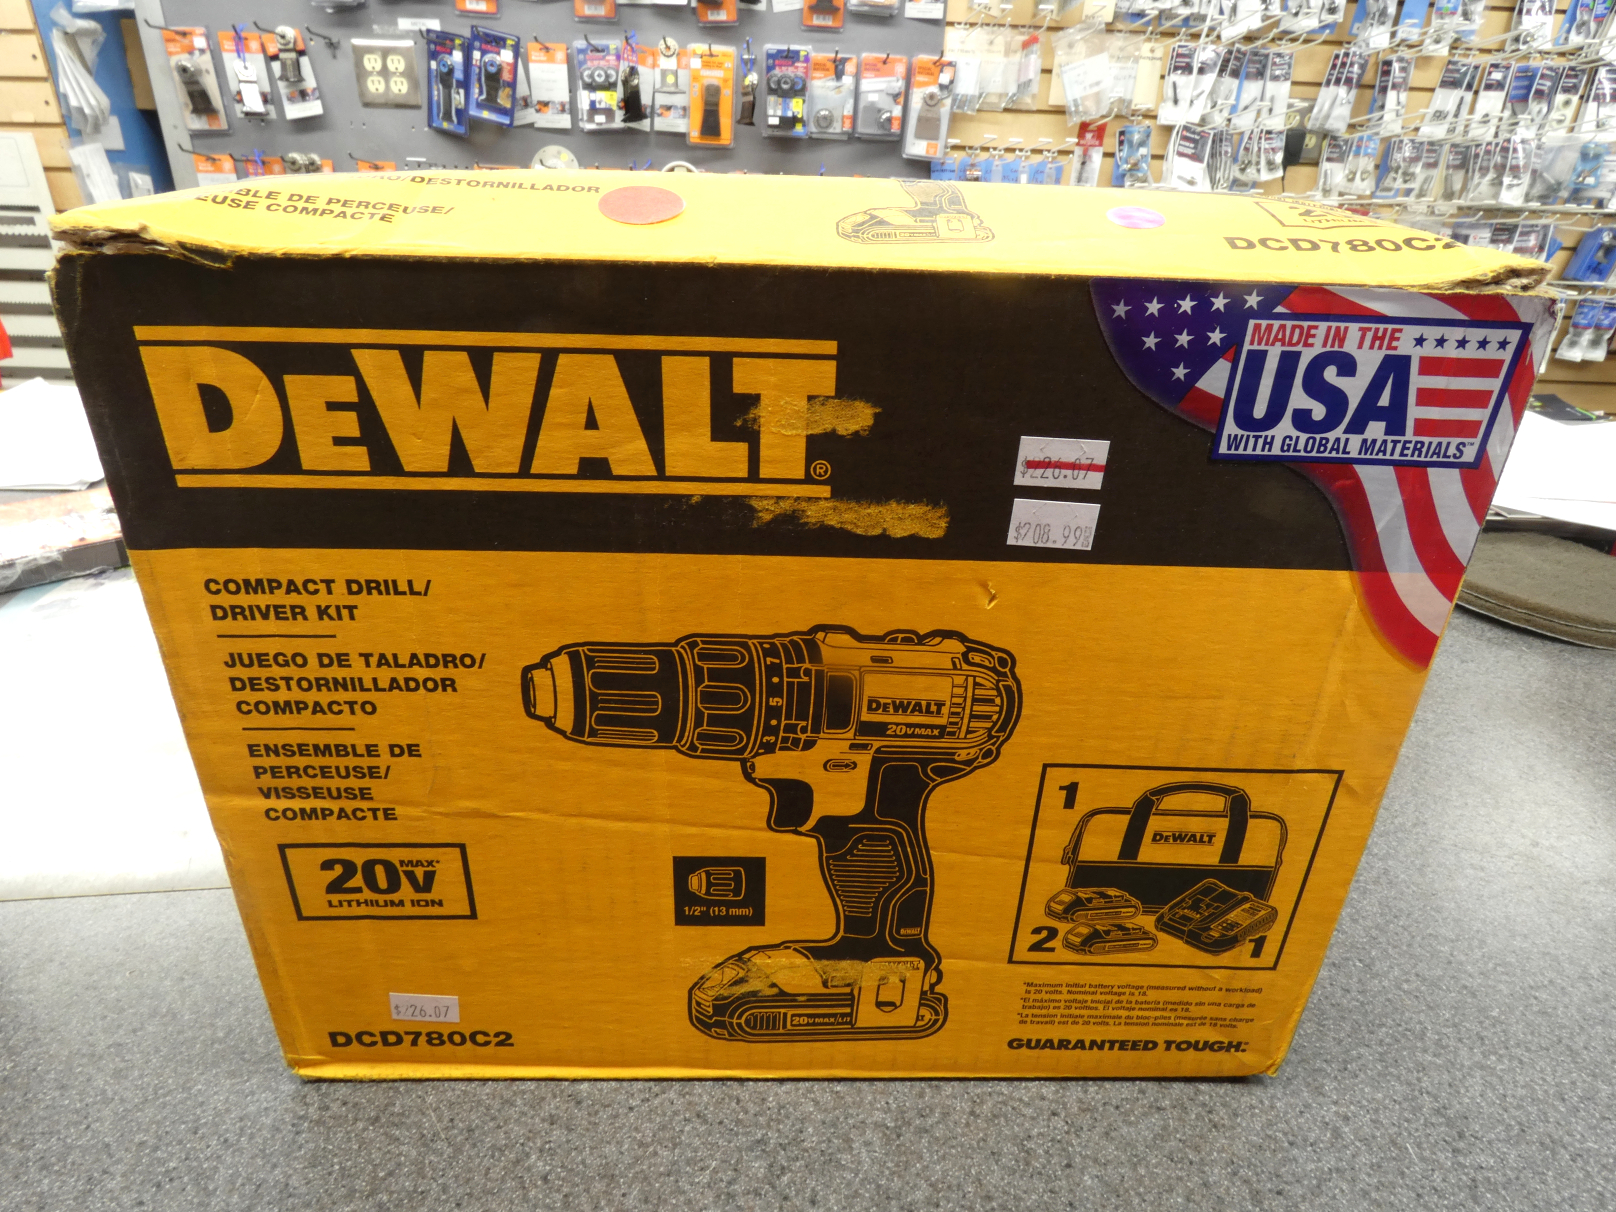 Dewalt DCD780C2 Compact Drill and Driver Kit Discounted